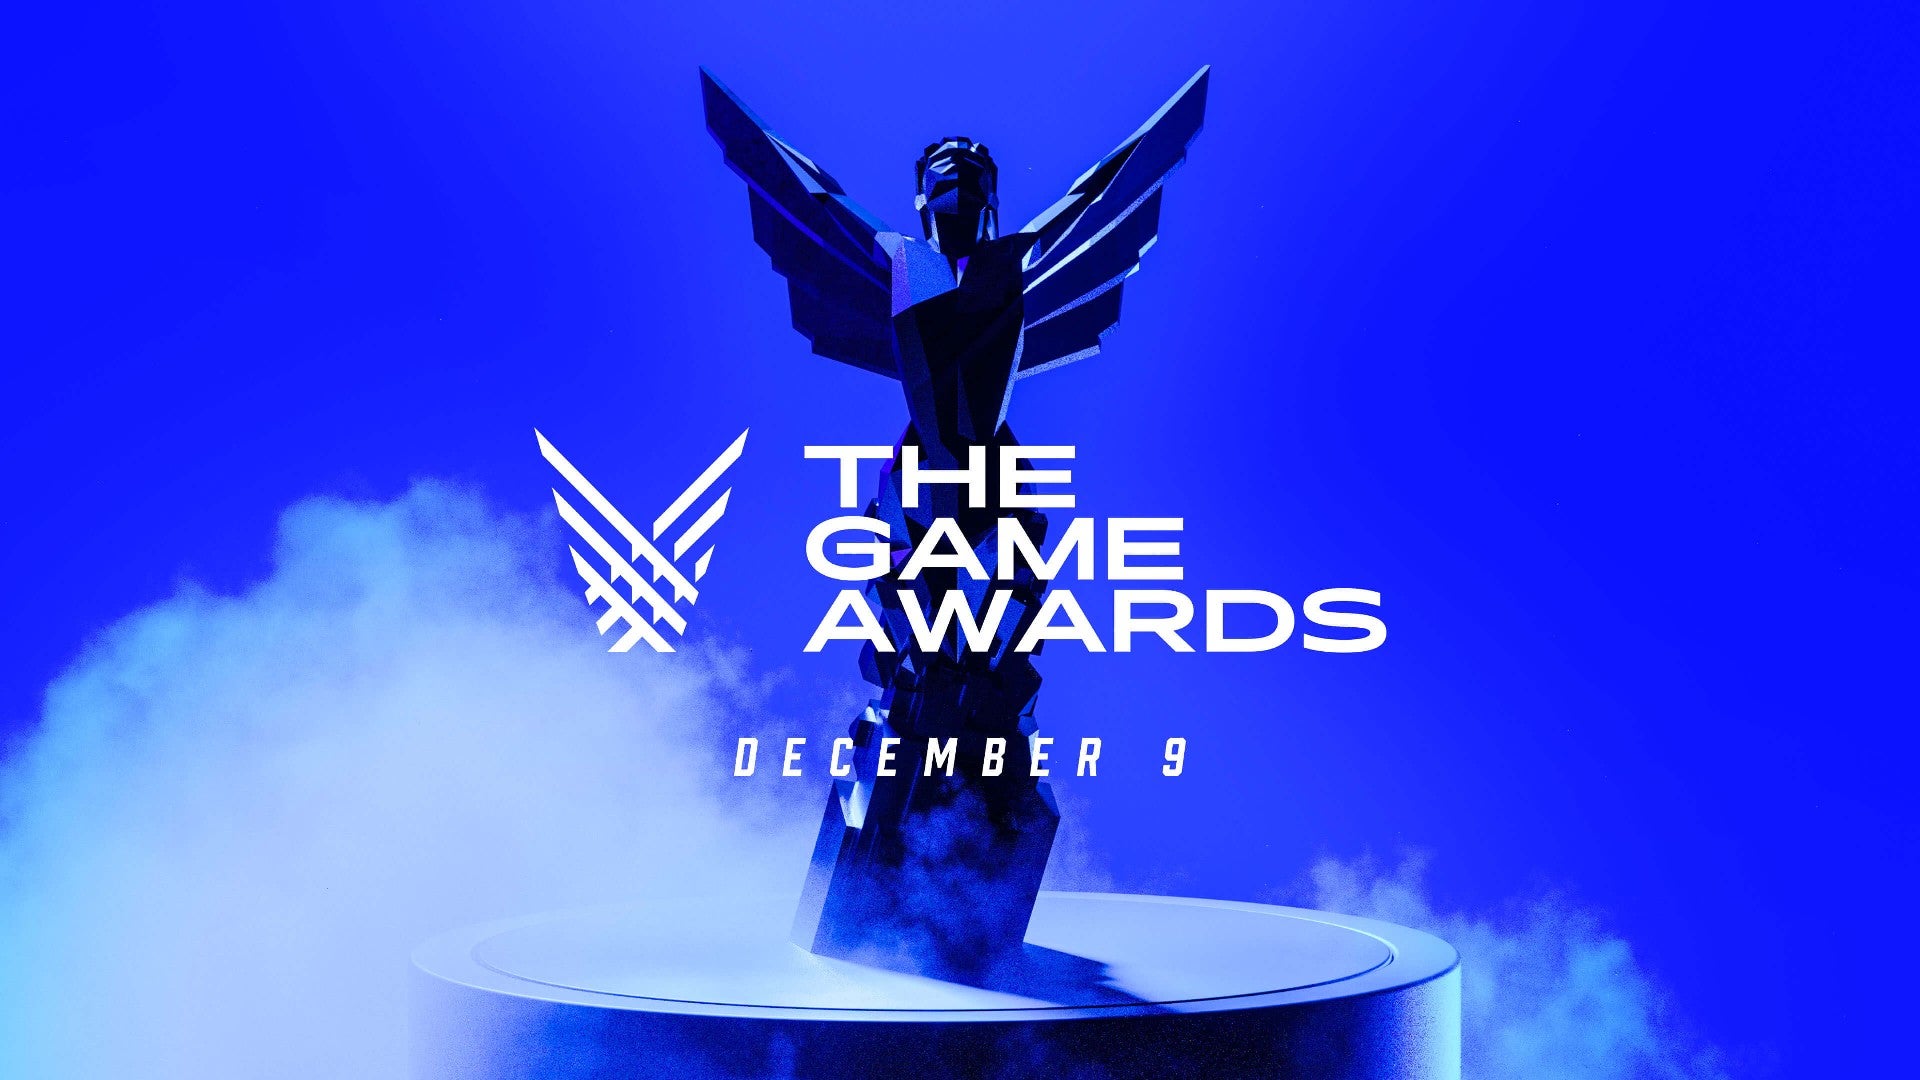 The Game Awards award against a blue smoky background